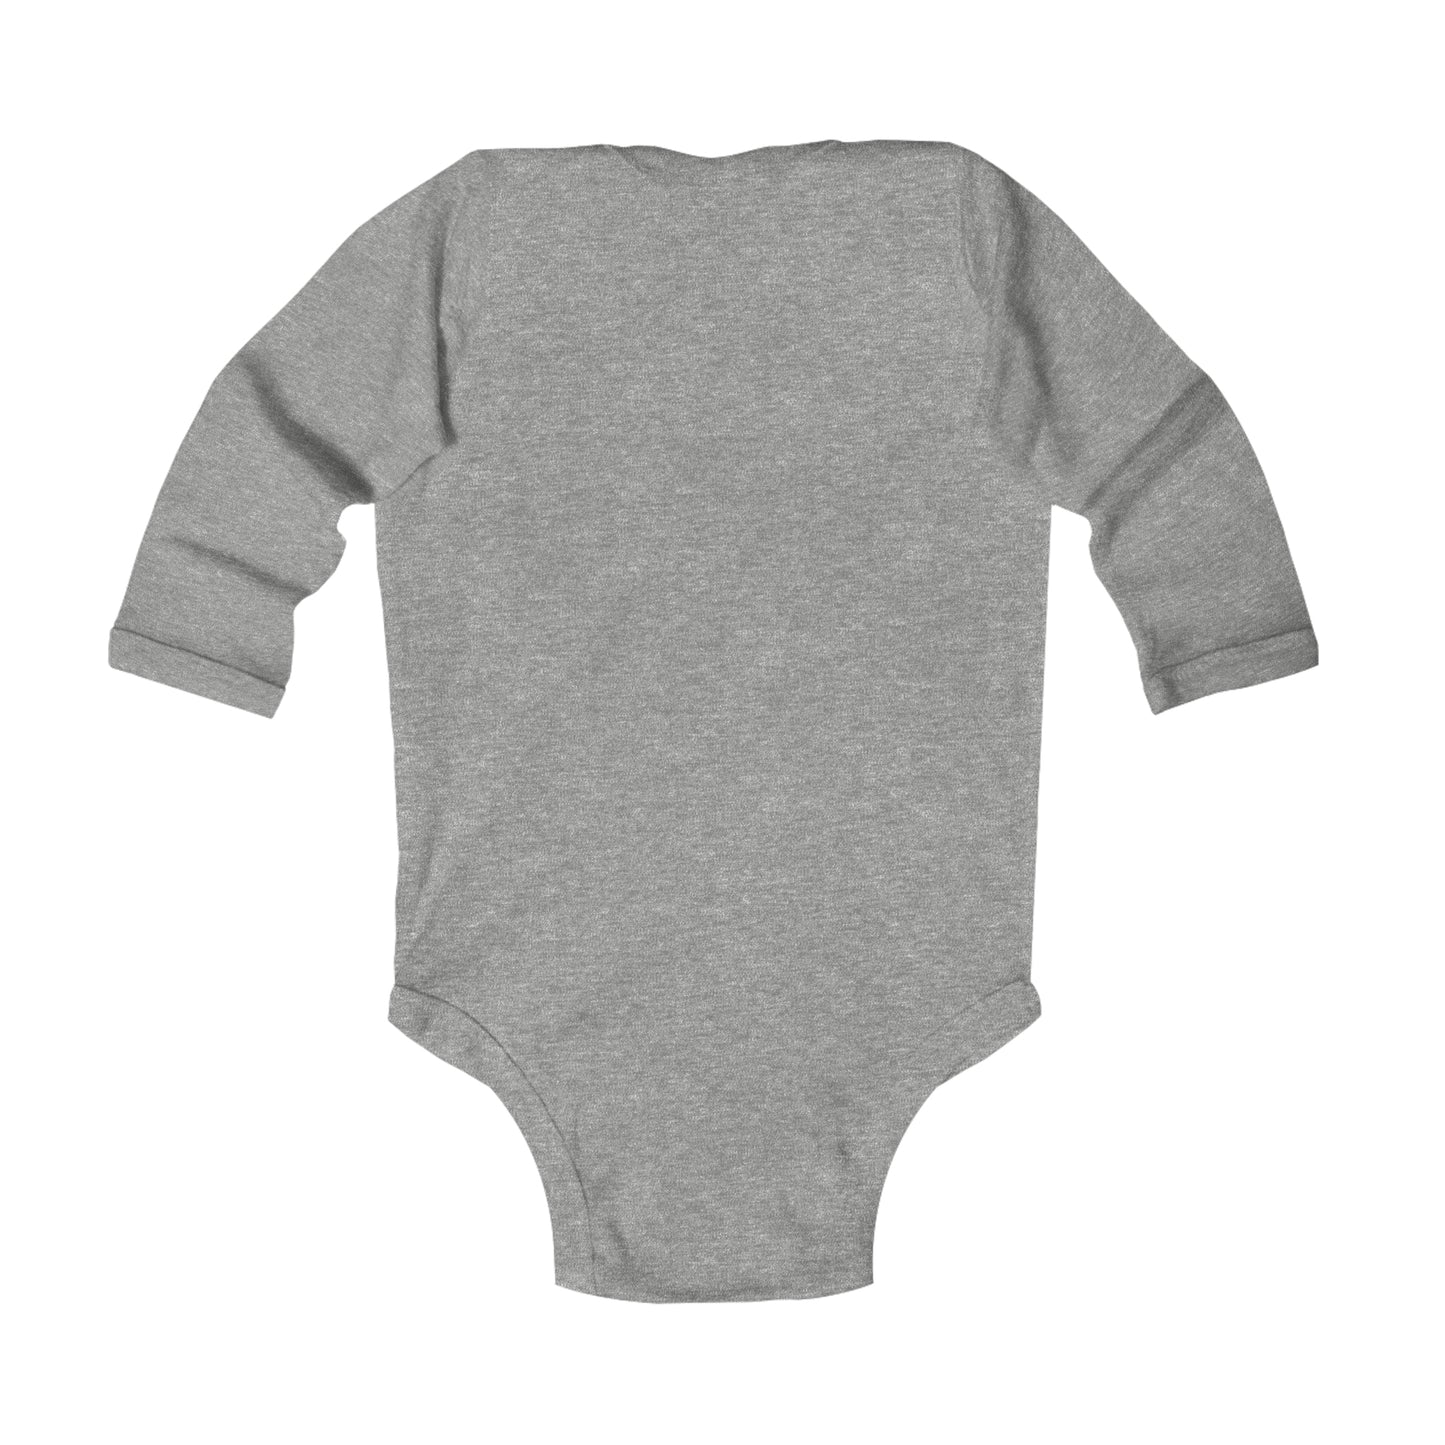 I don't want to go to bed print Infant Long Sleeve Bodysuit